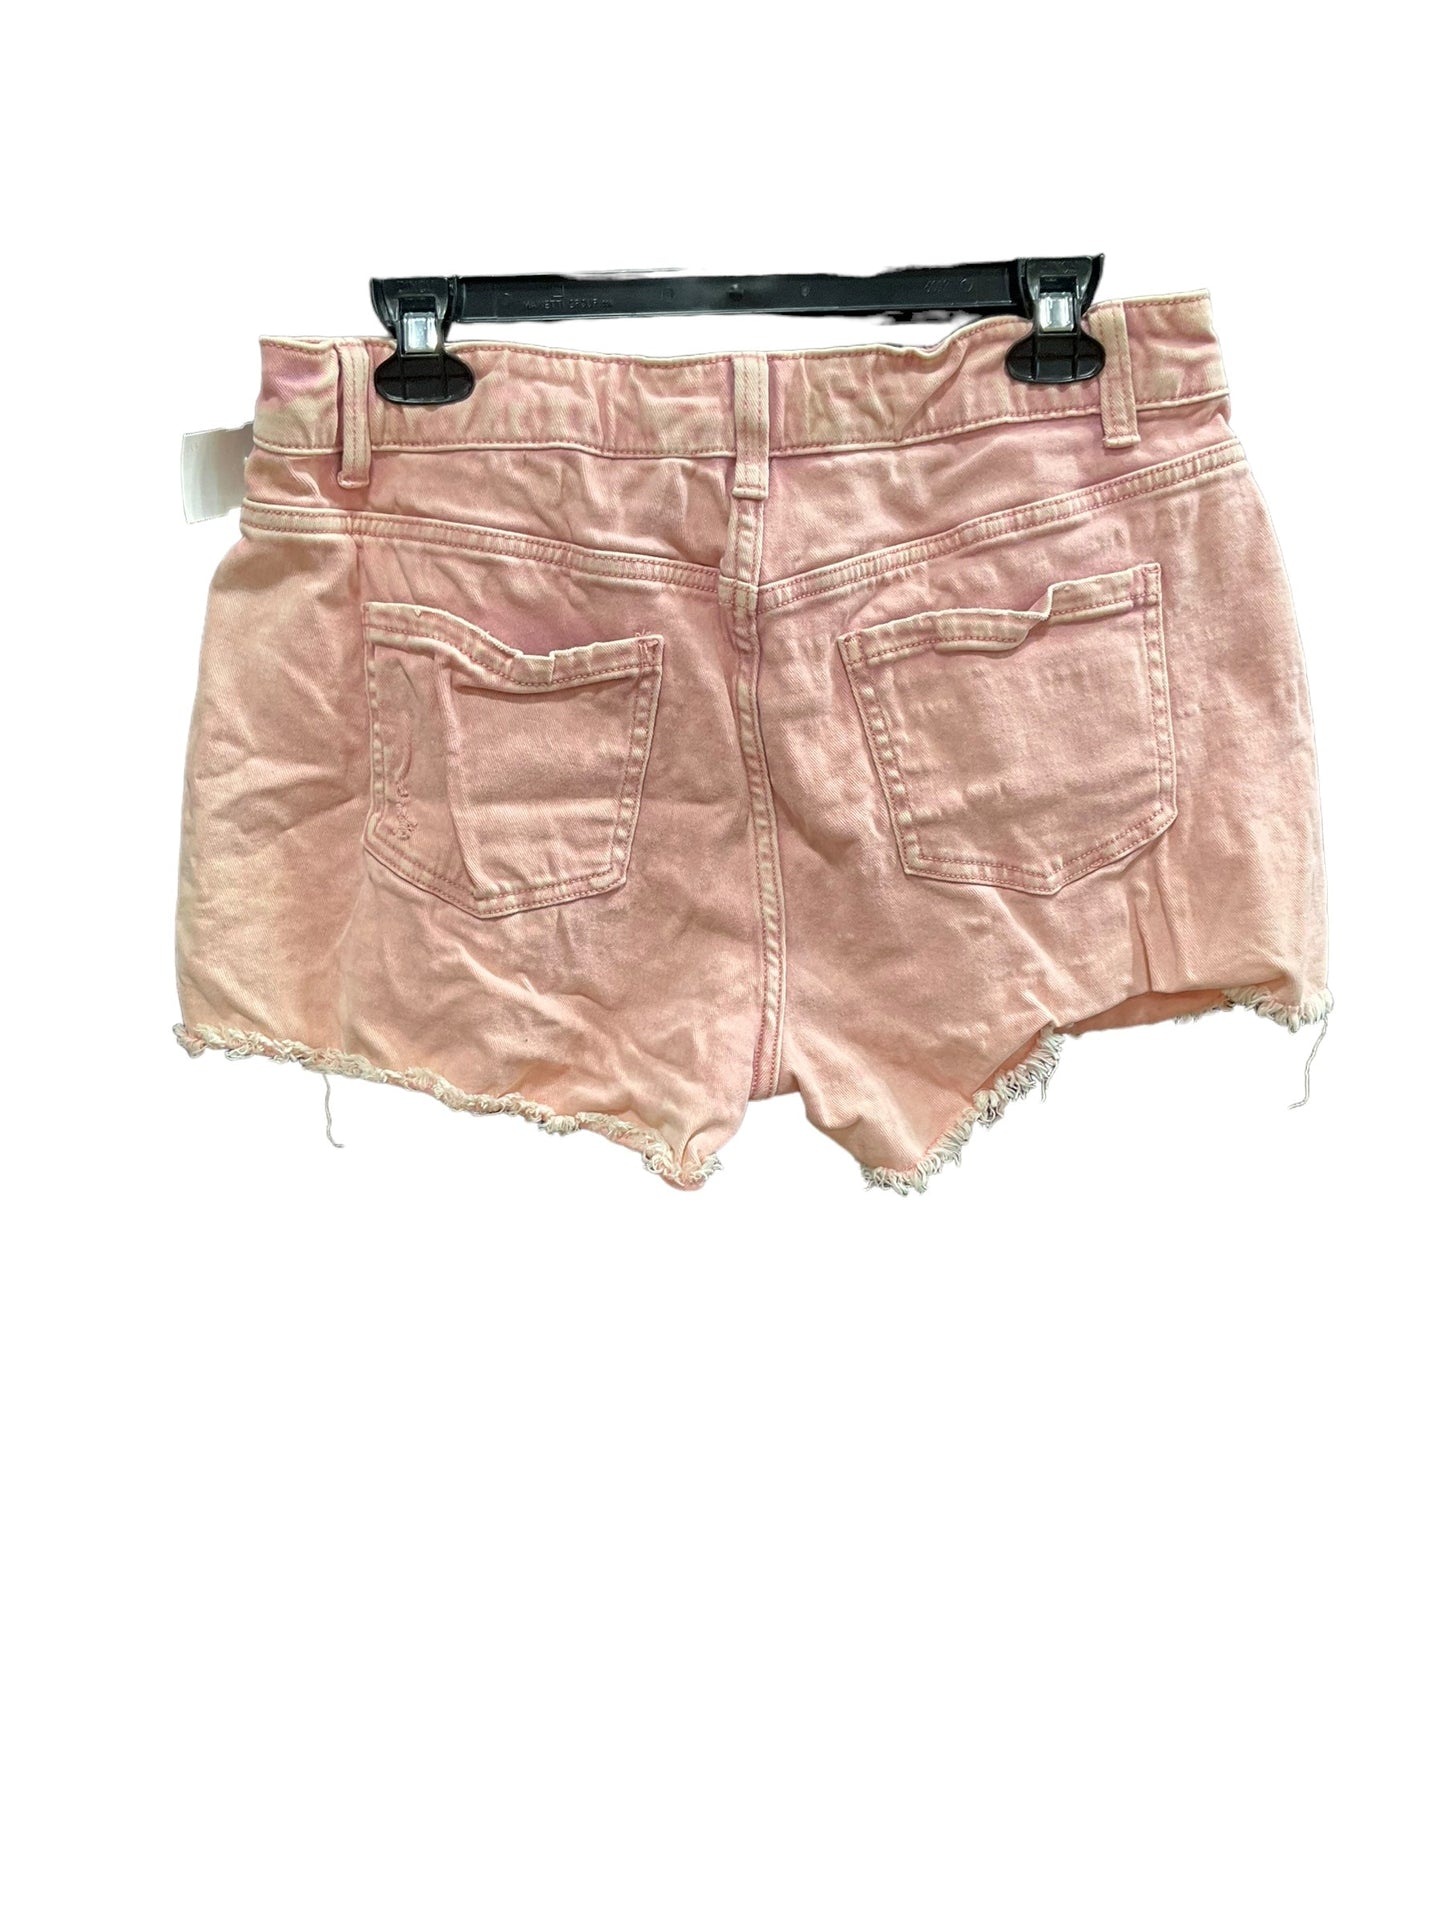 Pink Shorts Time And Tru, Size 10